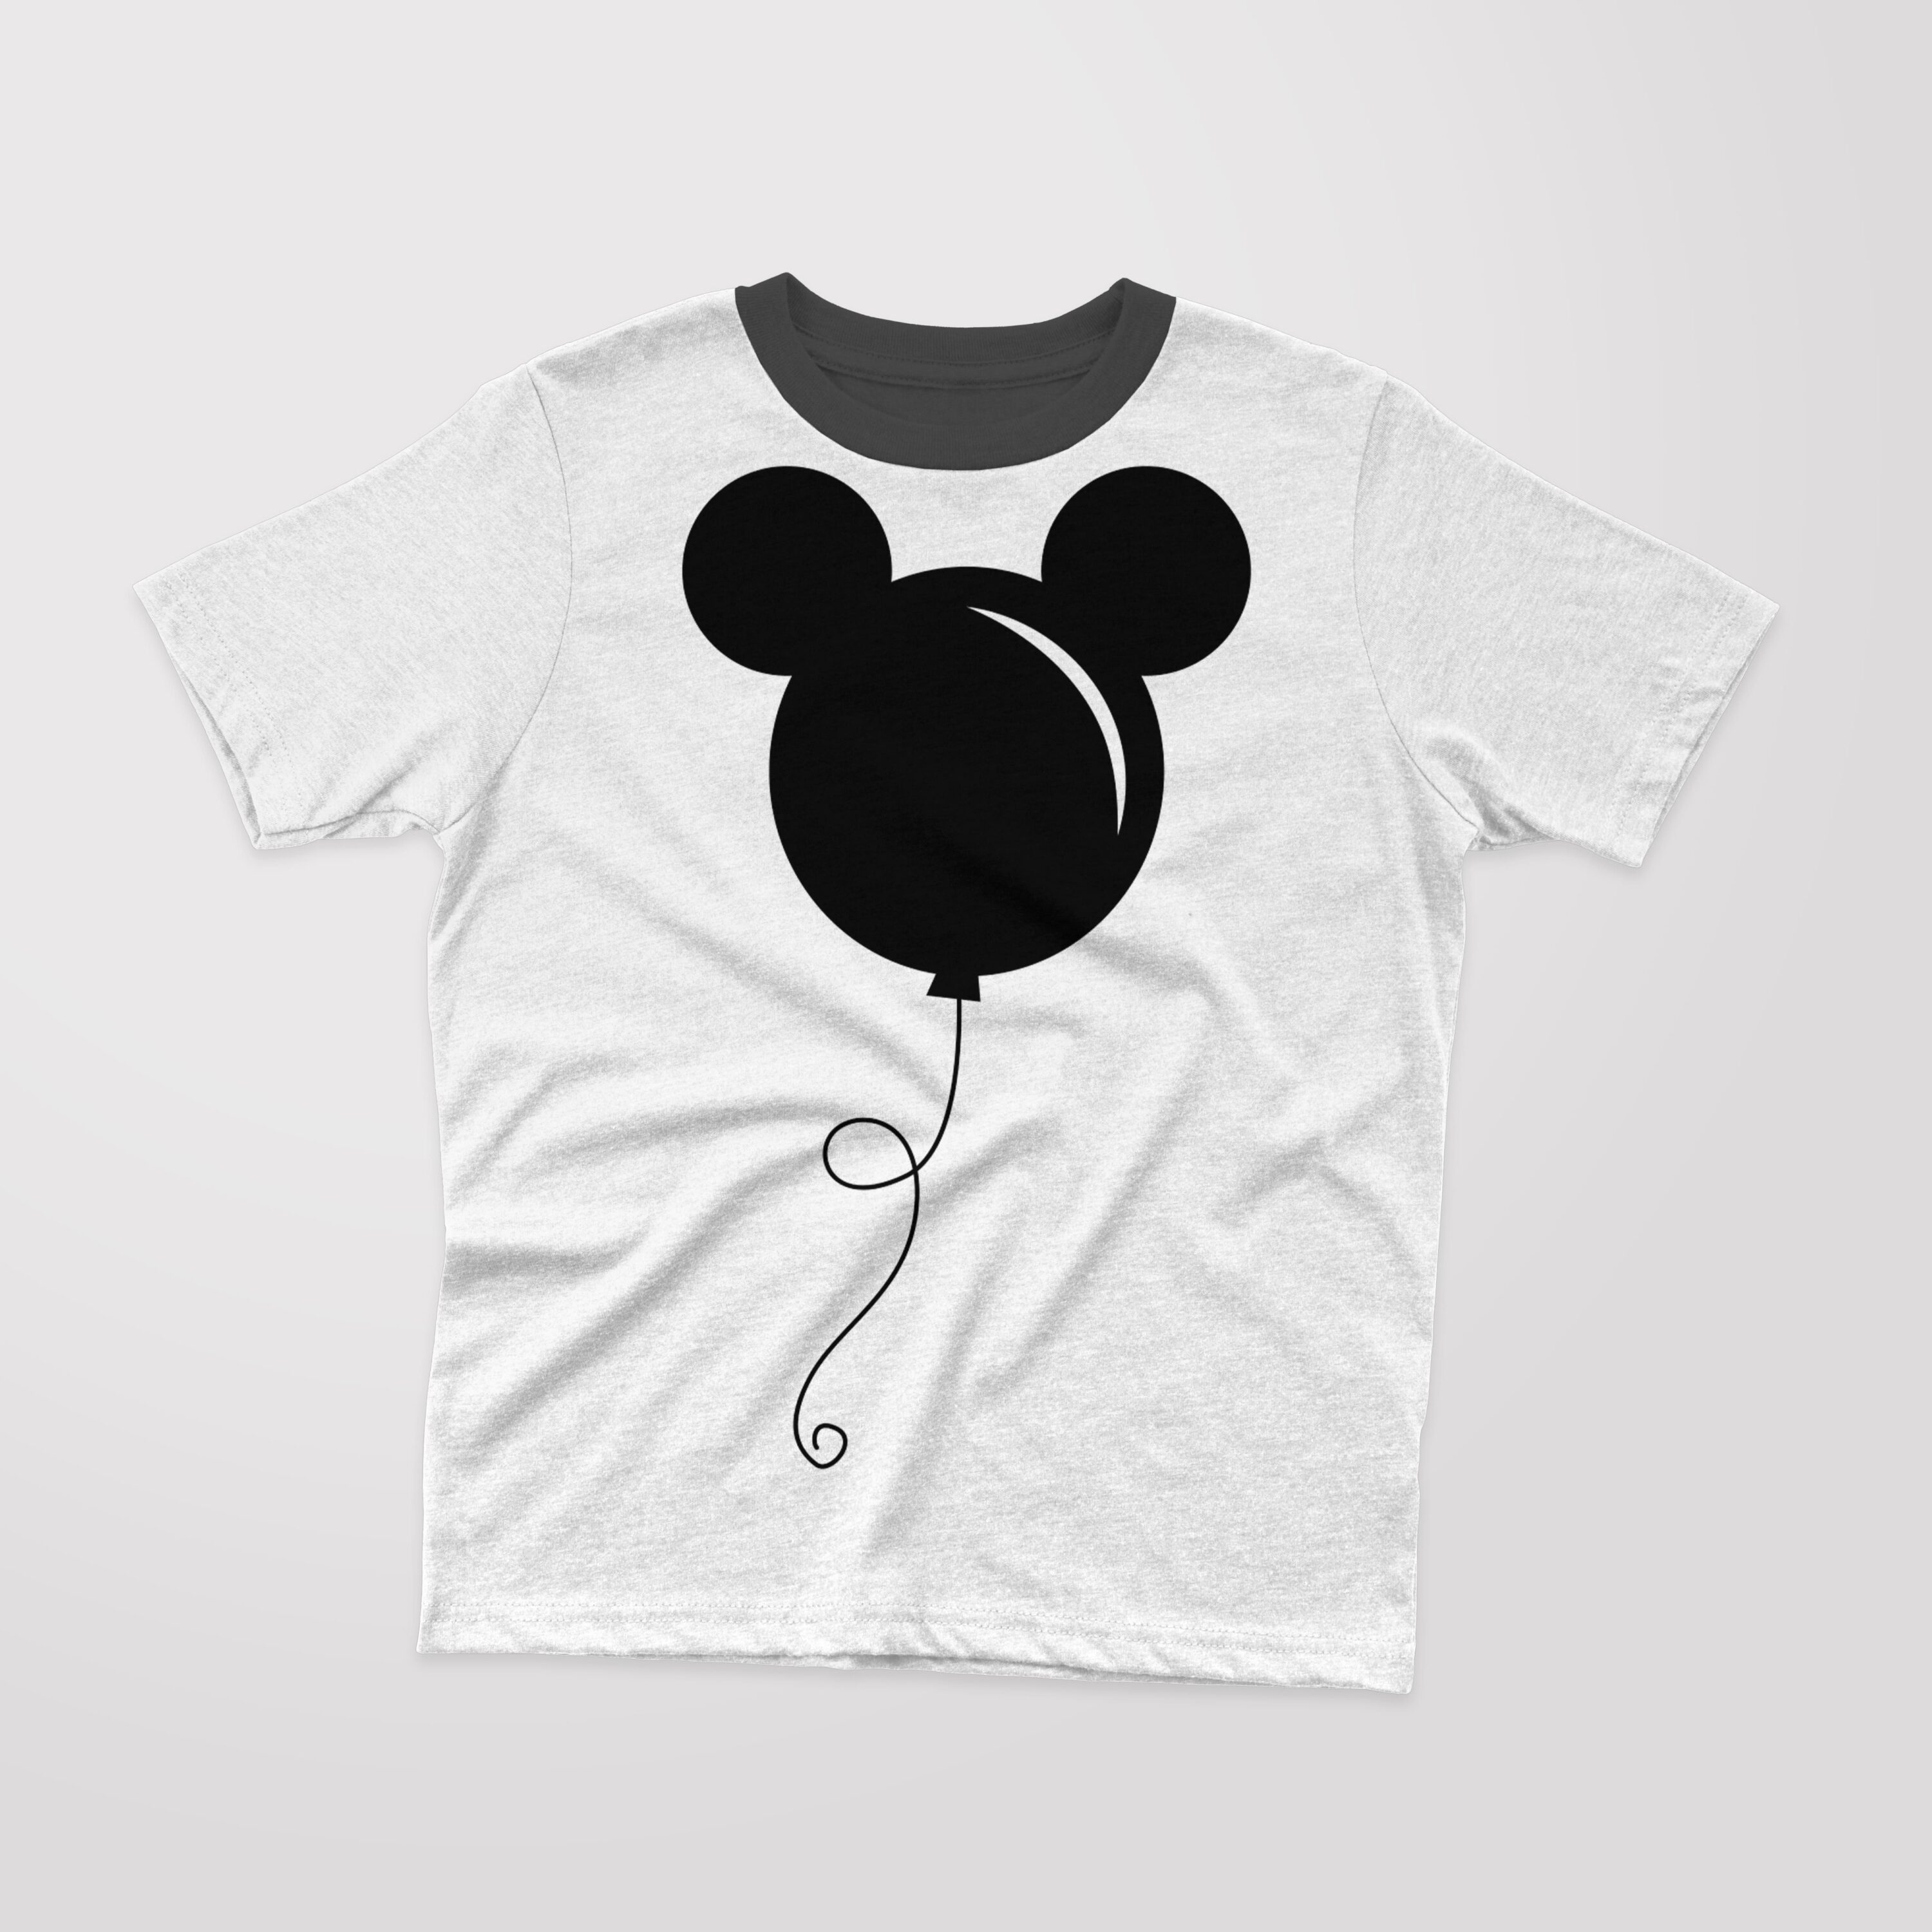 Mickey Mouse balloon in a silhouette style.